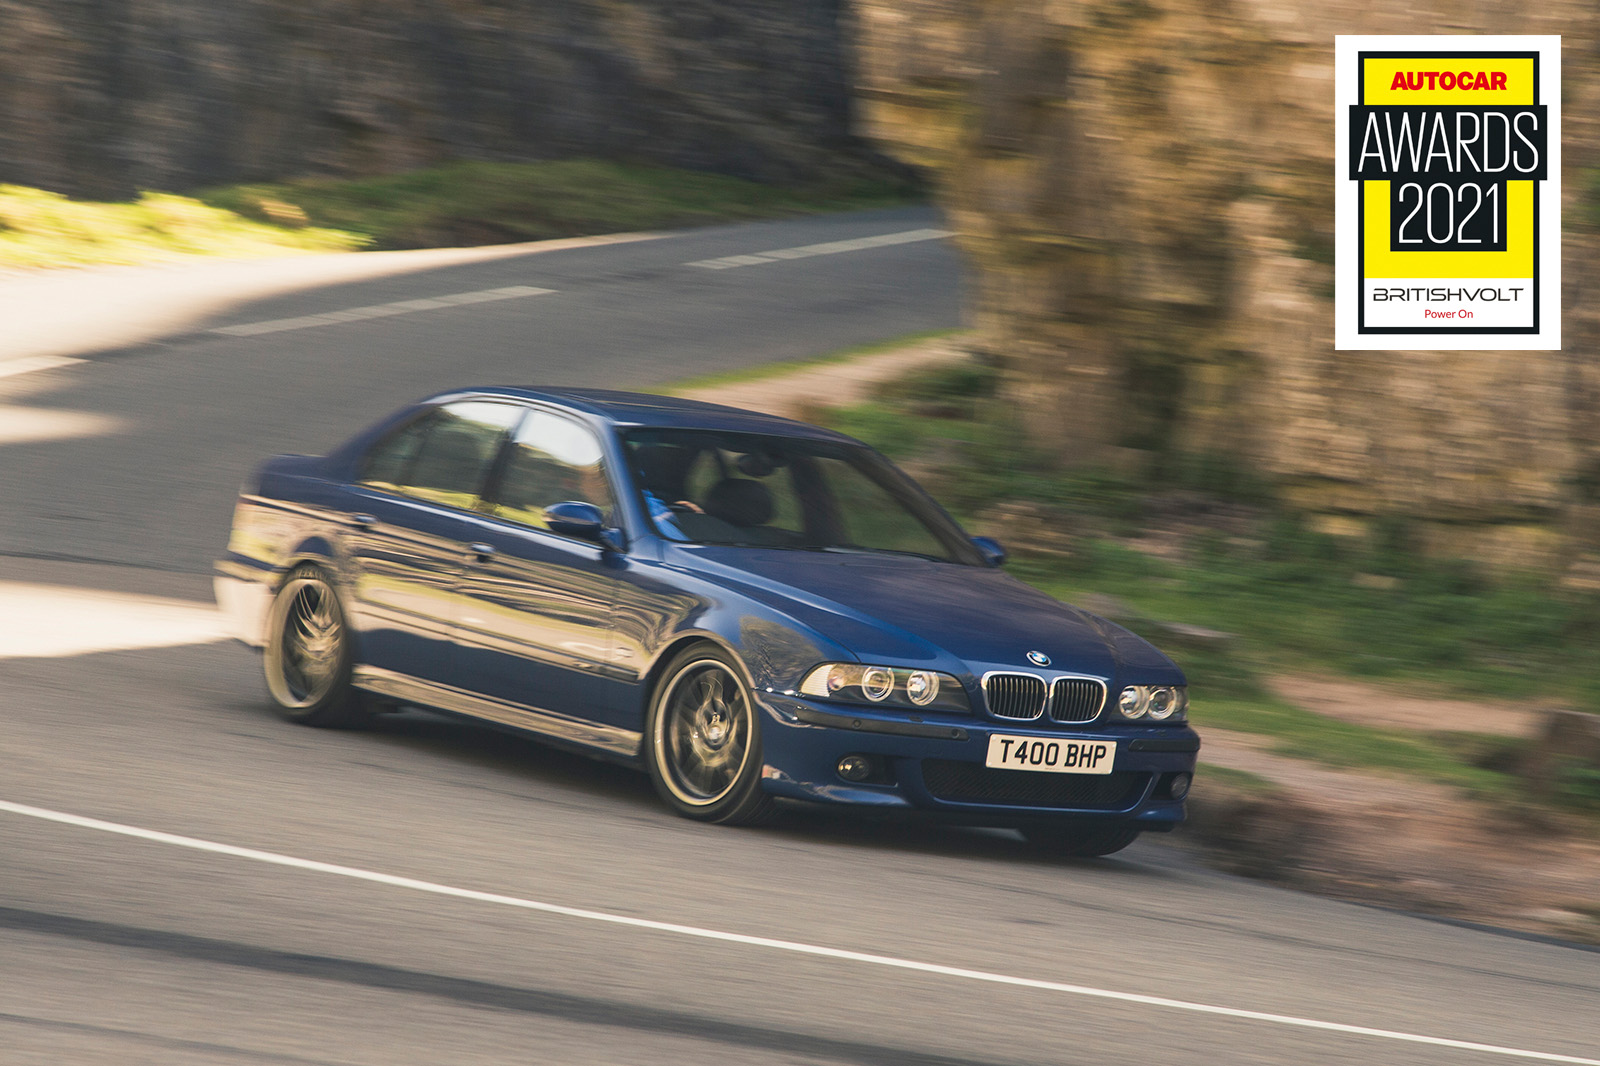 Used Car Hero Revisiting The 9 Bmw M5 Autocar